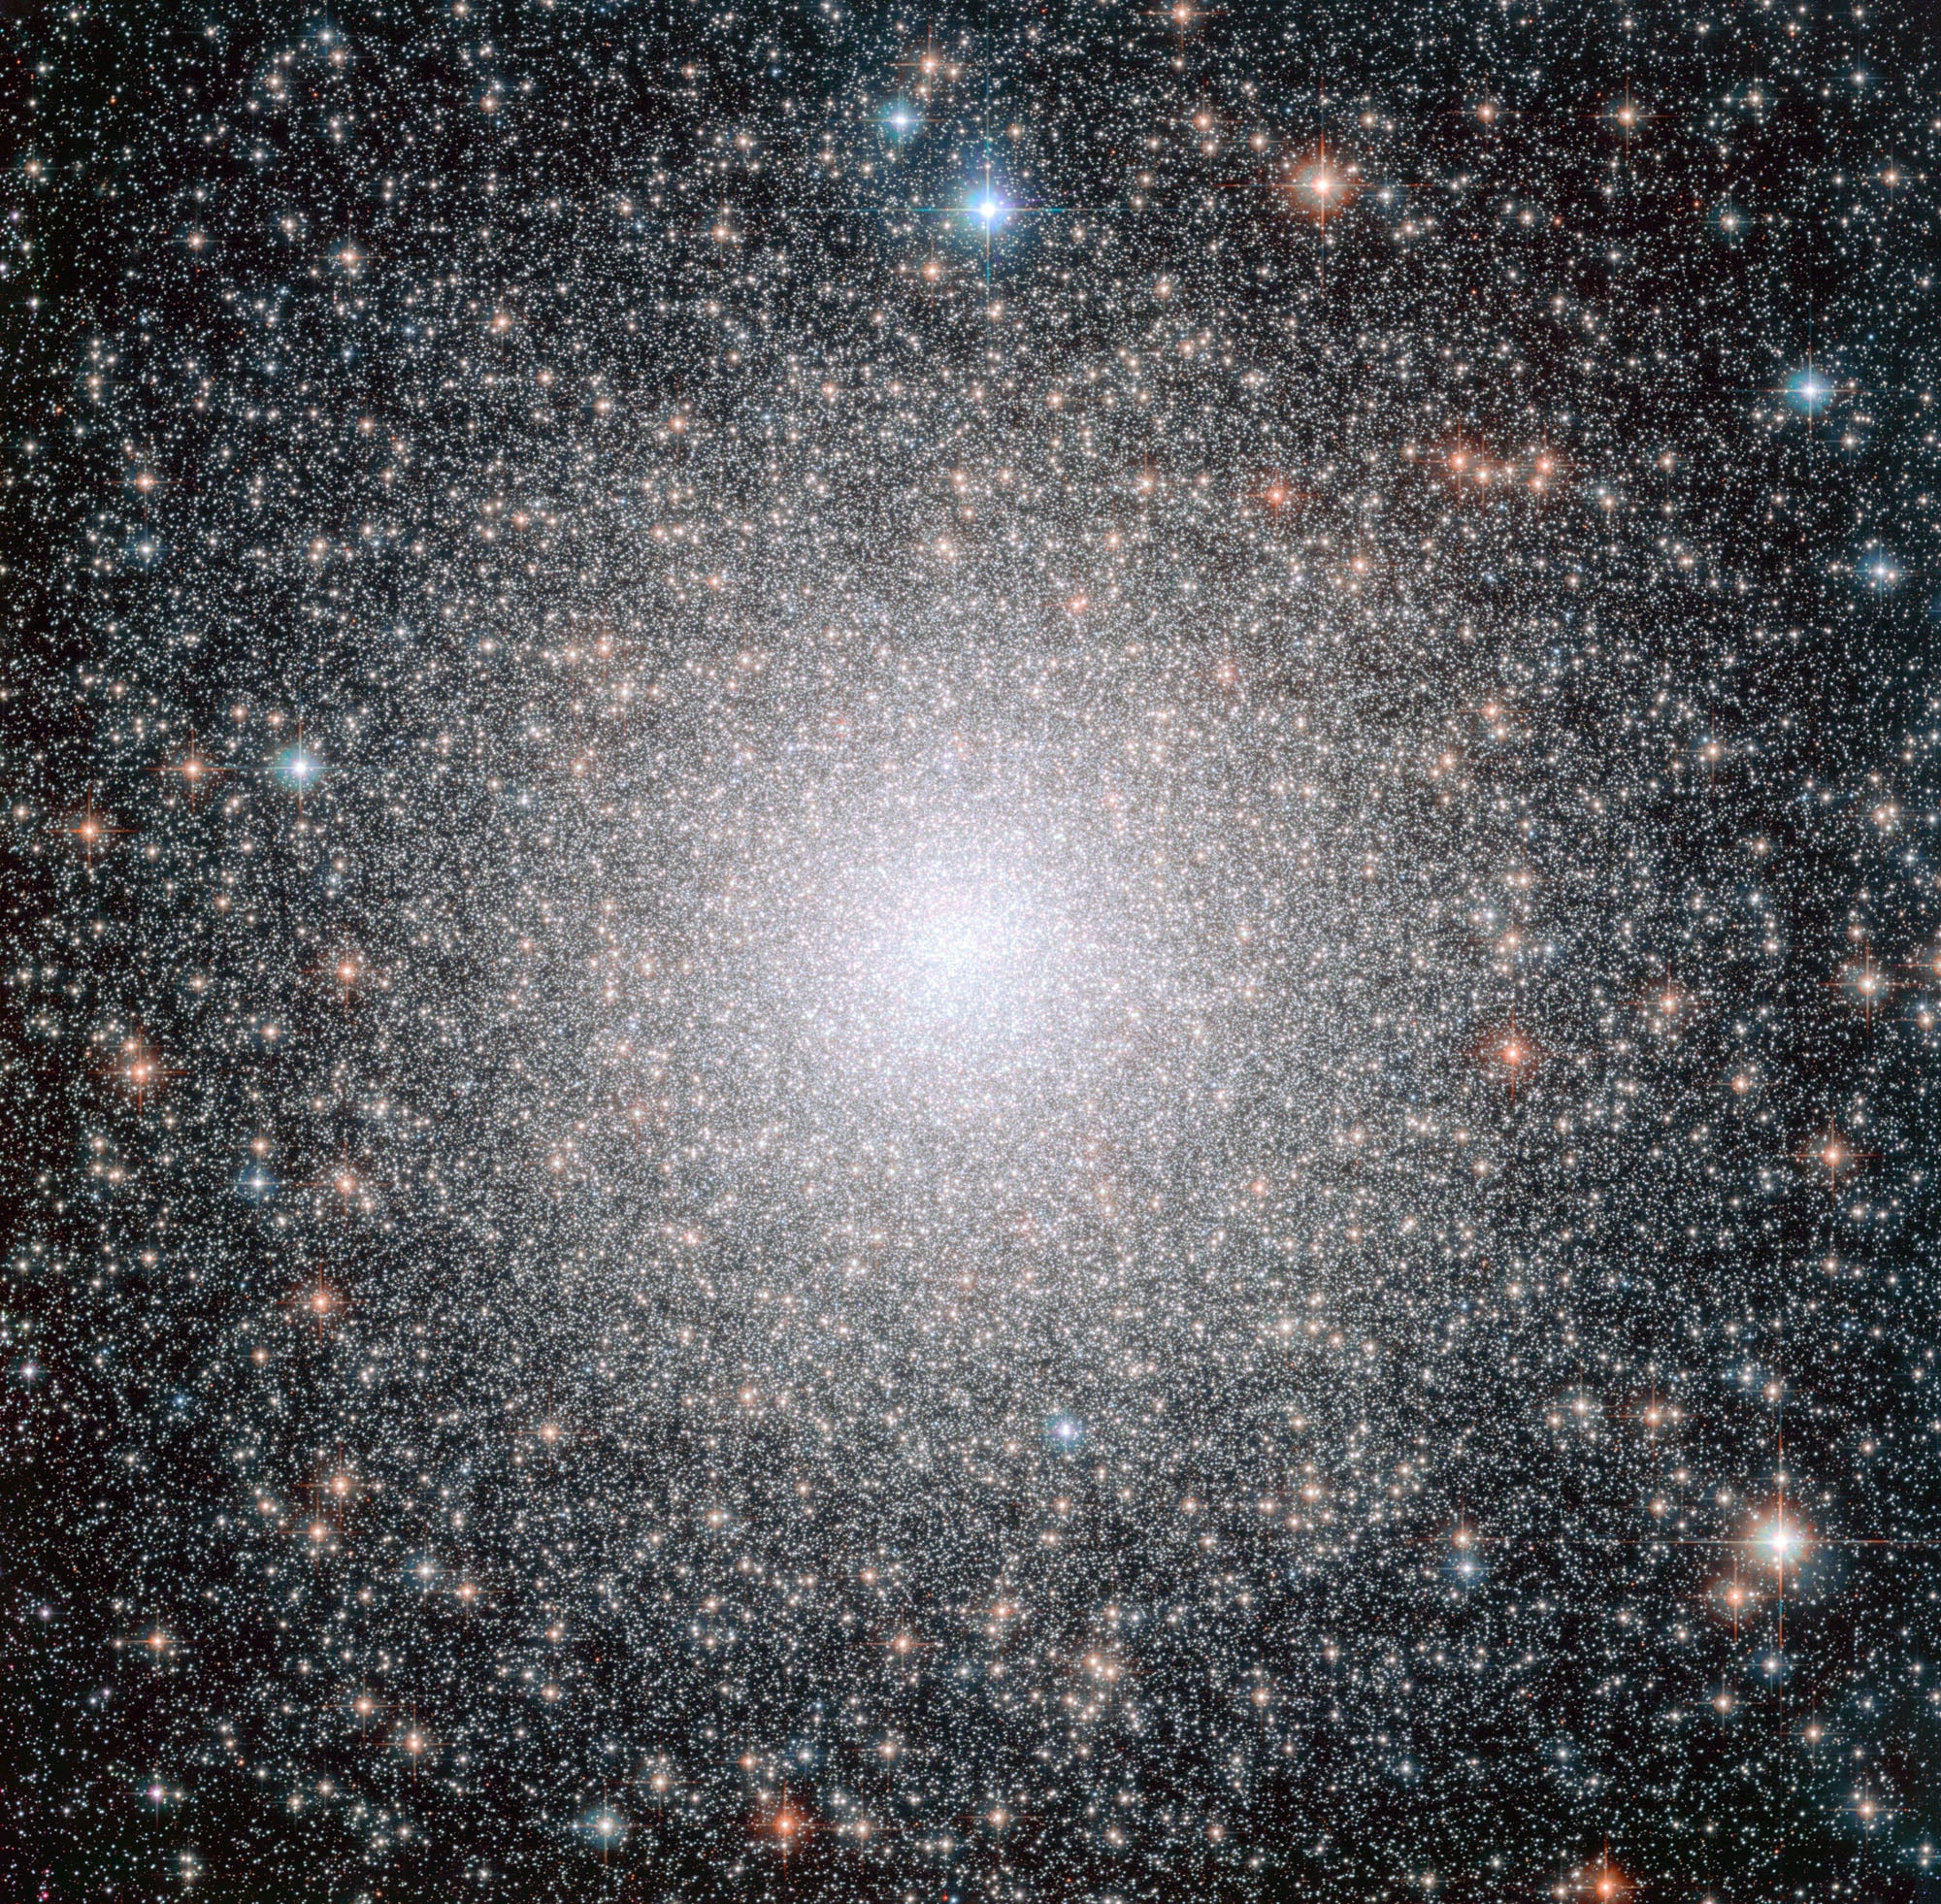 The globular cluster NGC 6388, observed by Hubble